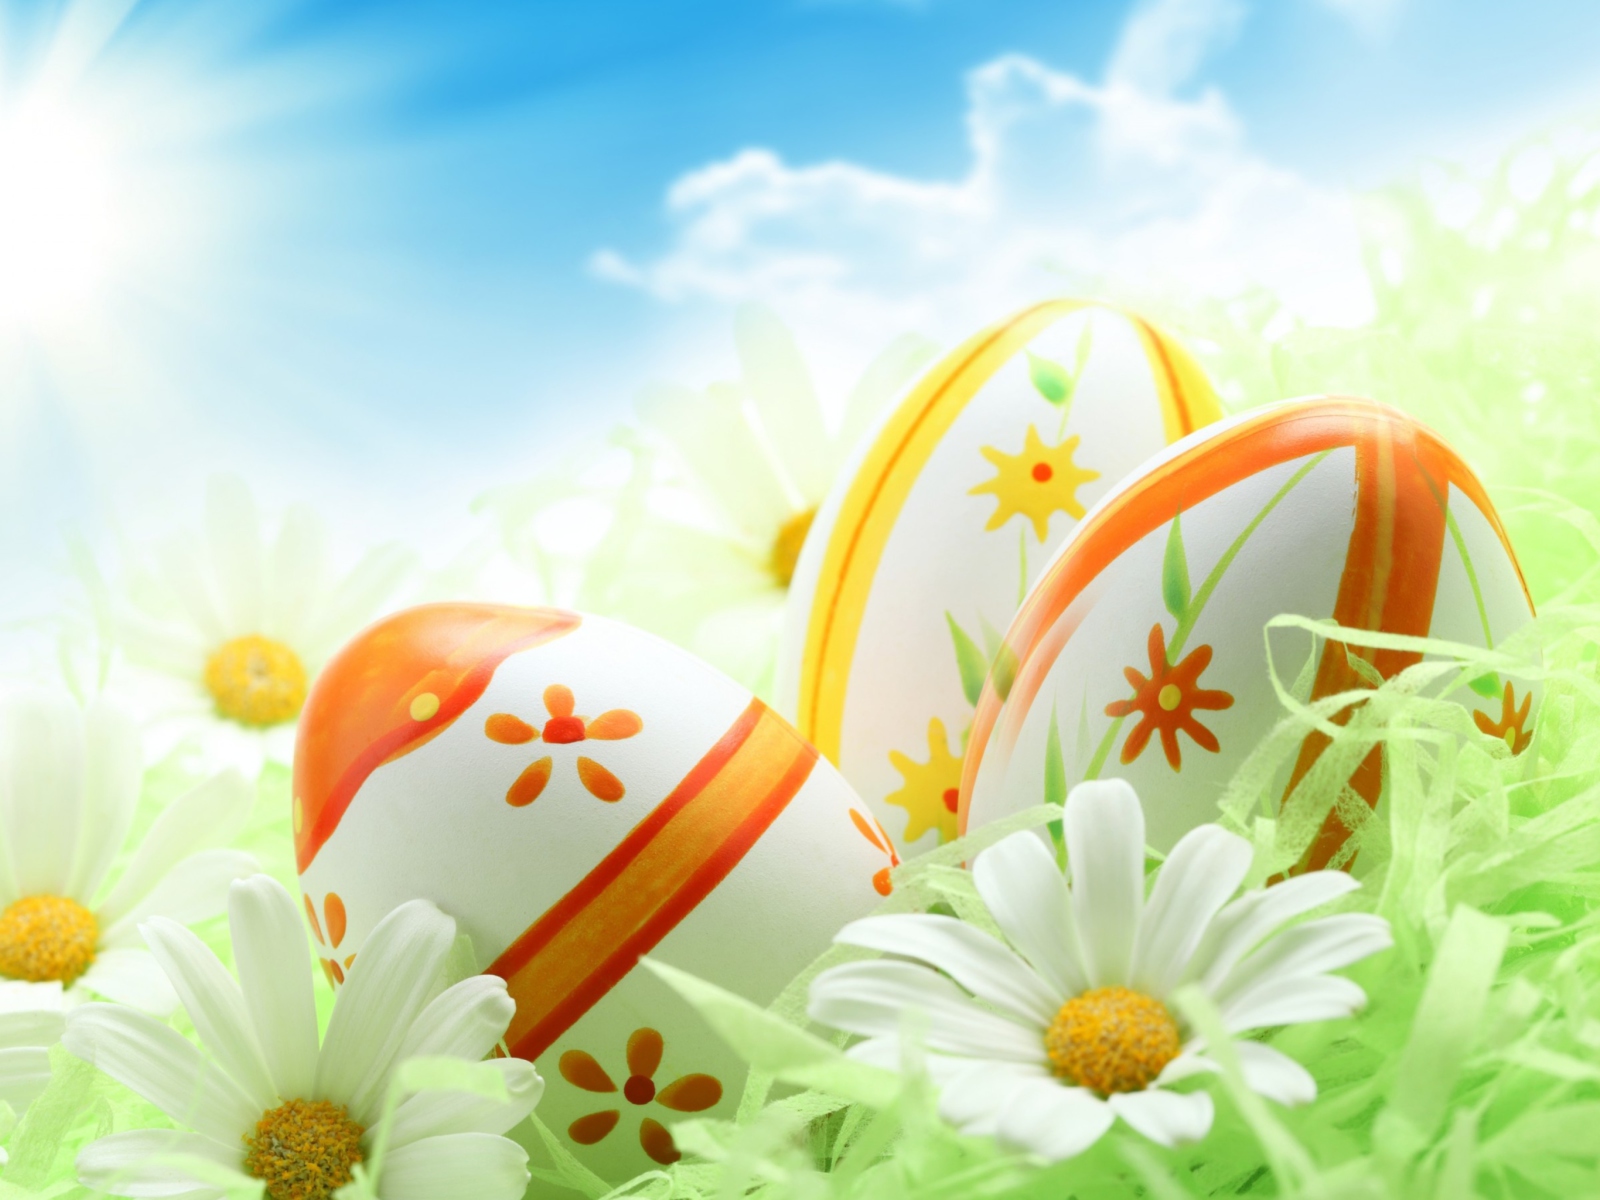 Easter Eggs And Daisies wallpaper 1600x1200